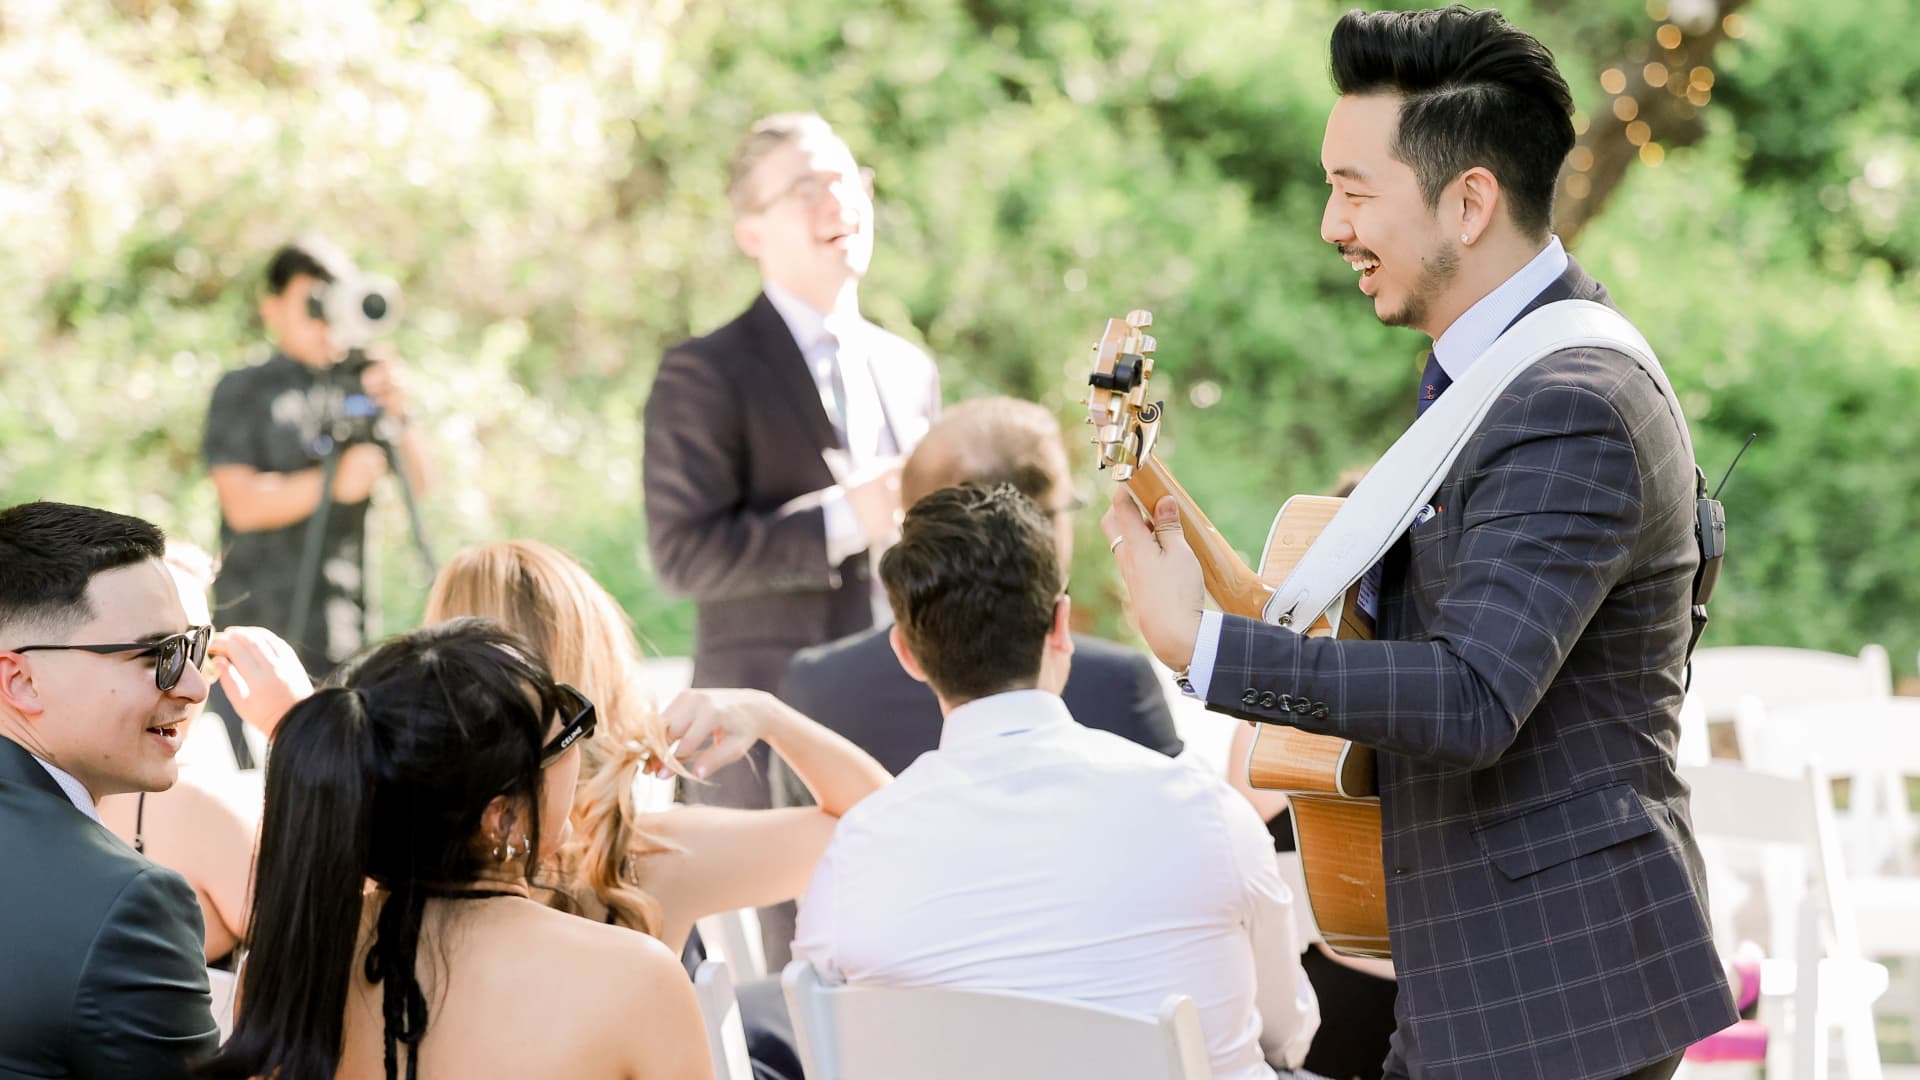 Moses Lin got his start as a wedding guitarist by playing at a friend's wedding.